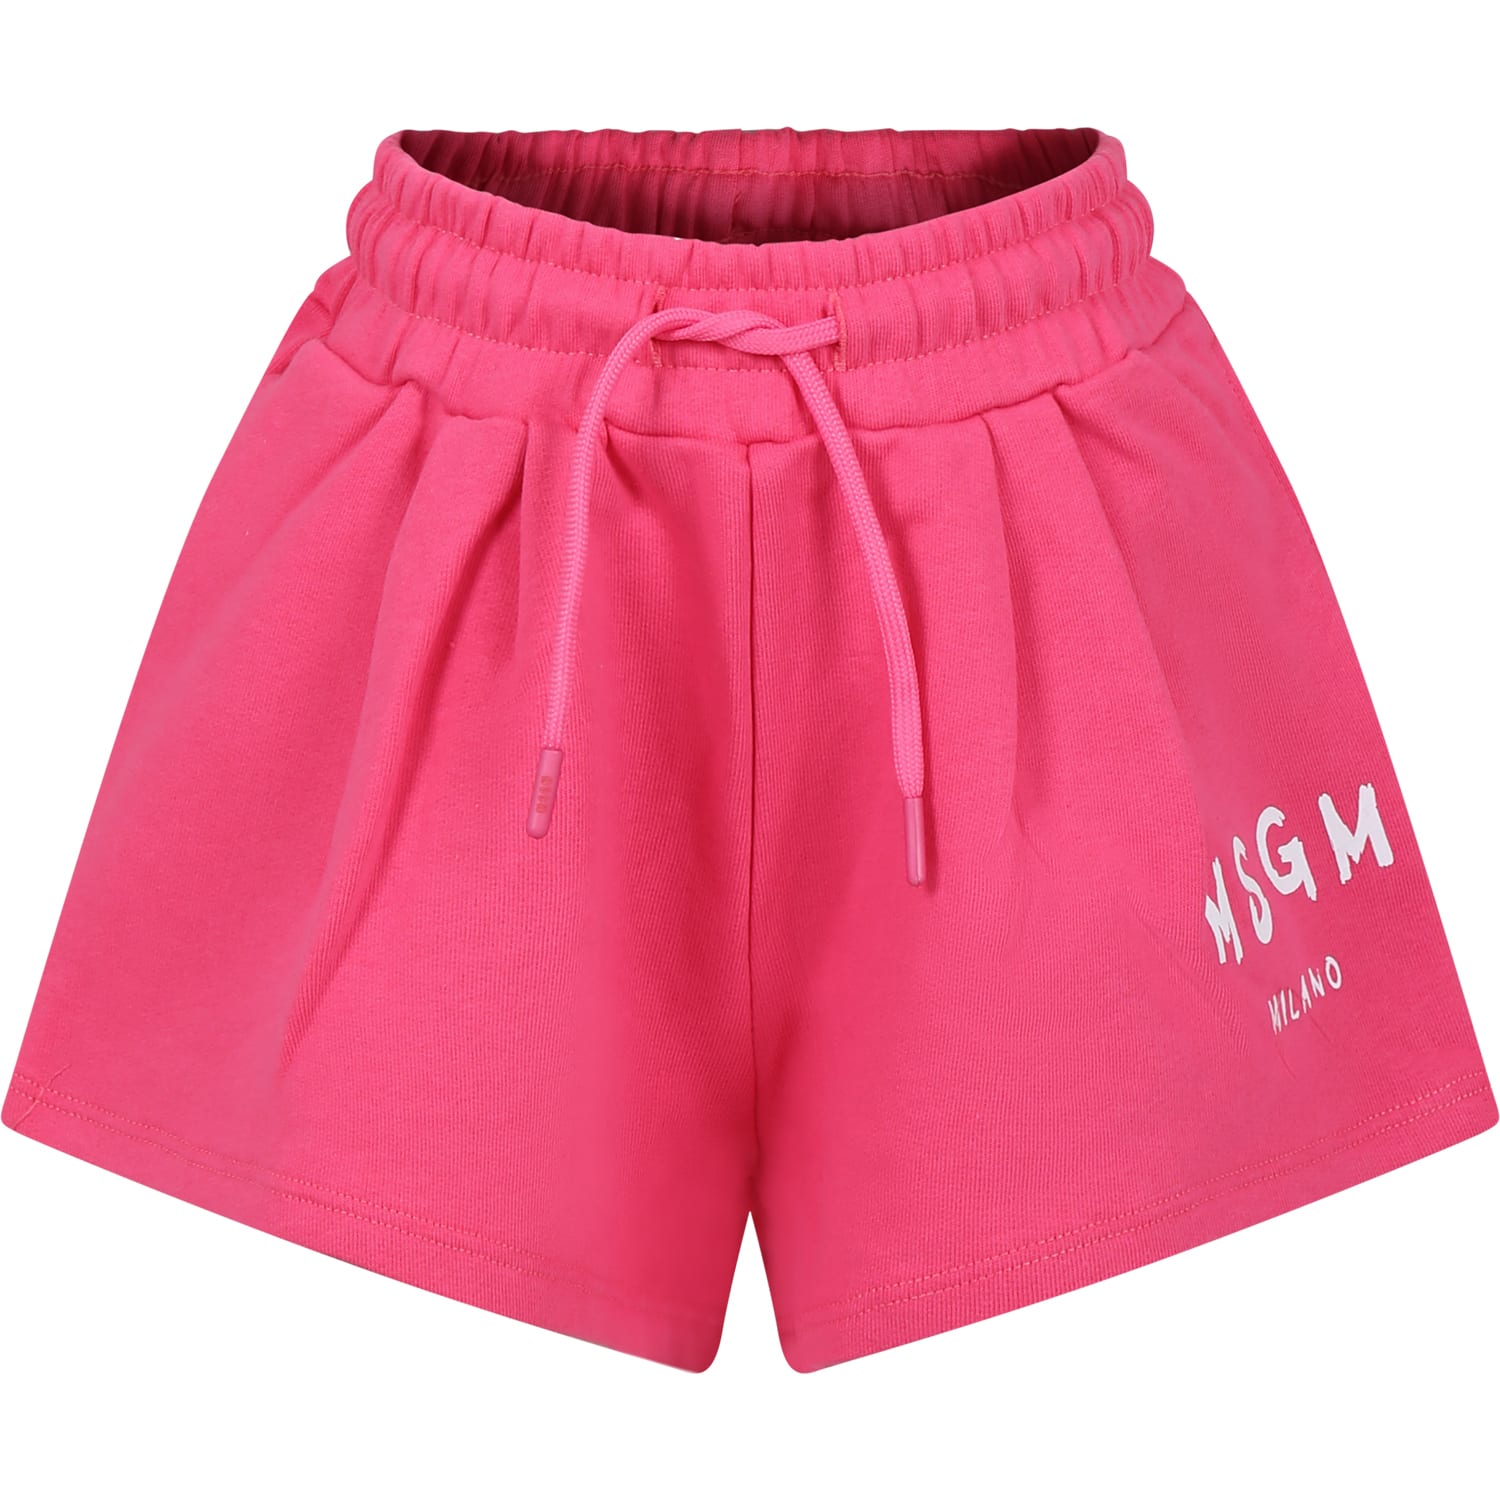 MSGM FUCHSIA SHORTS FOR GIRL WITH LOGO